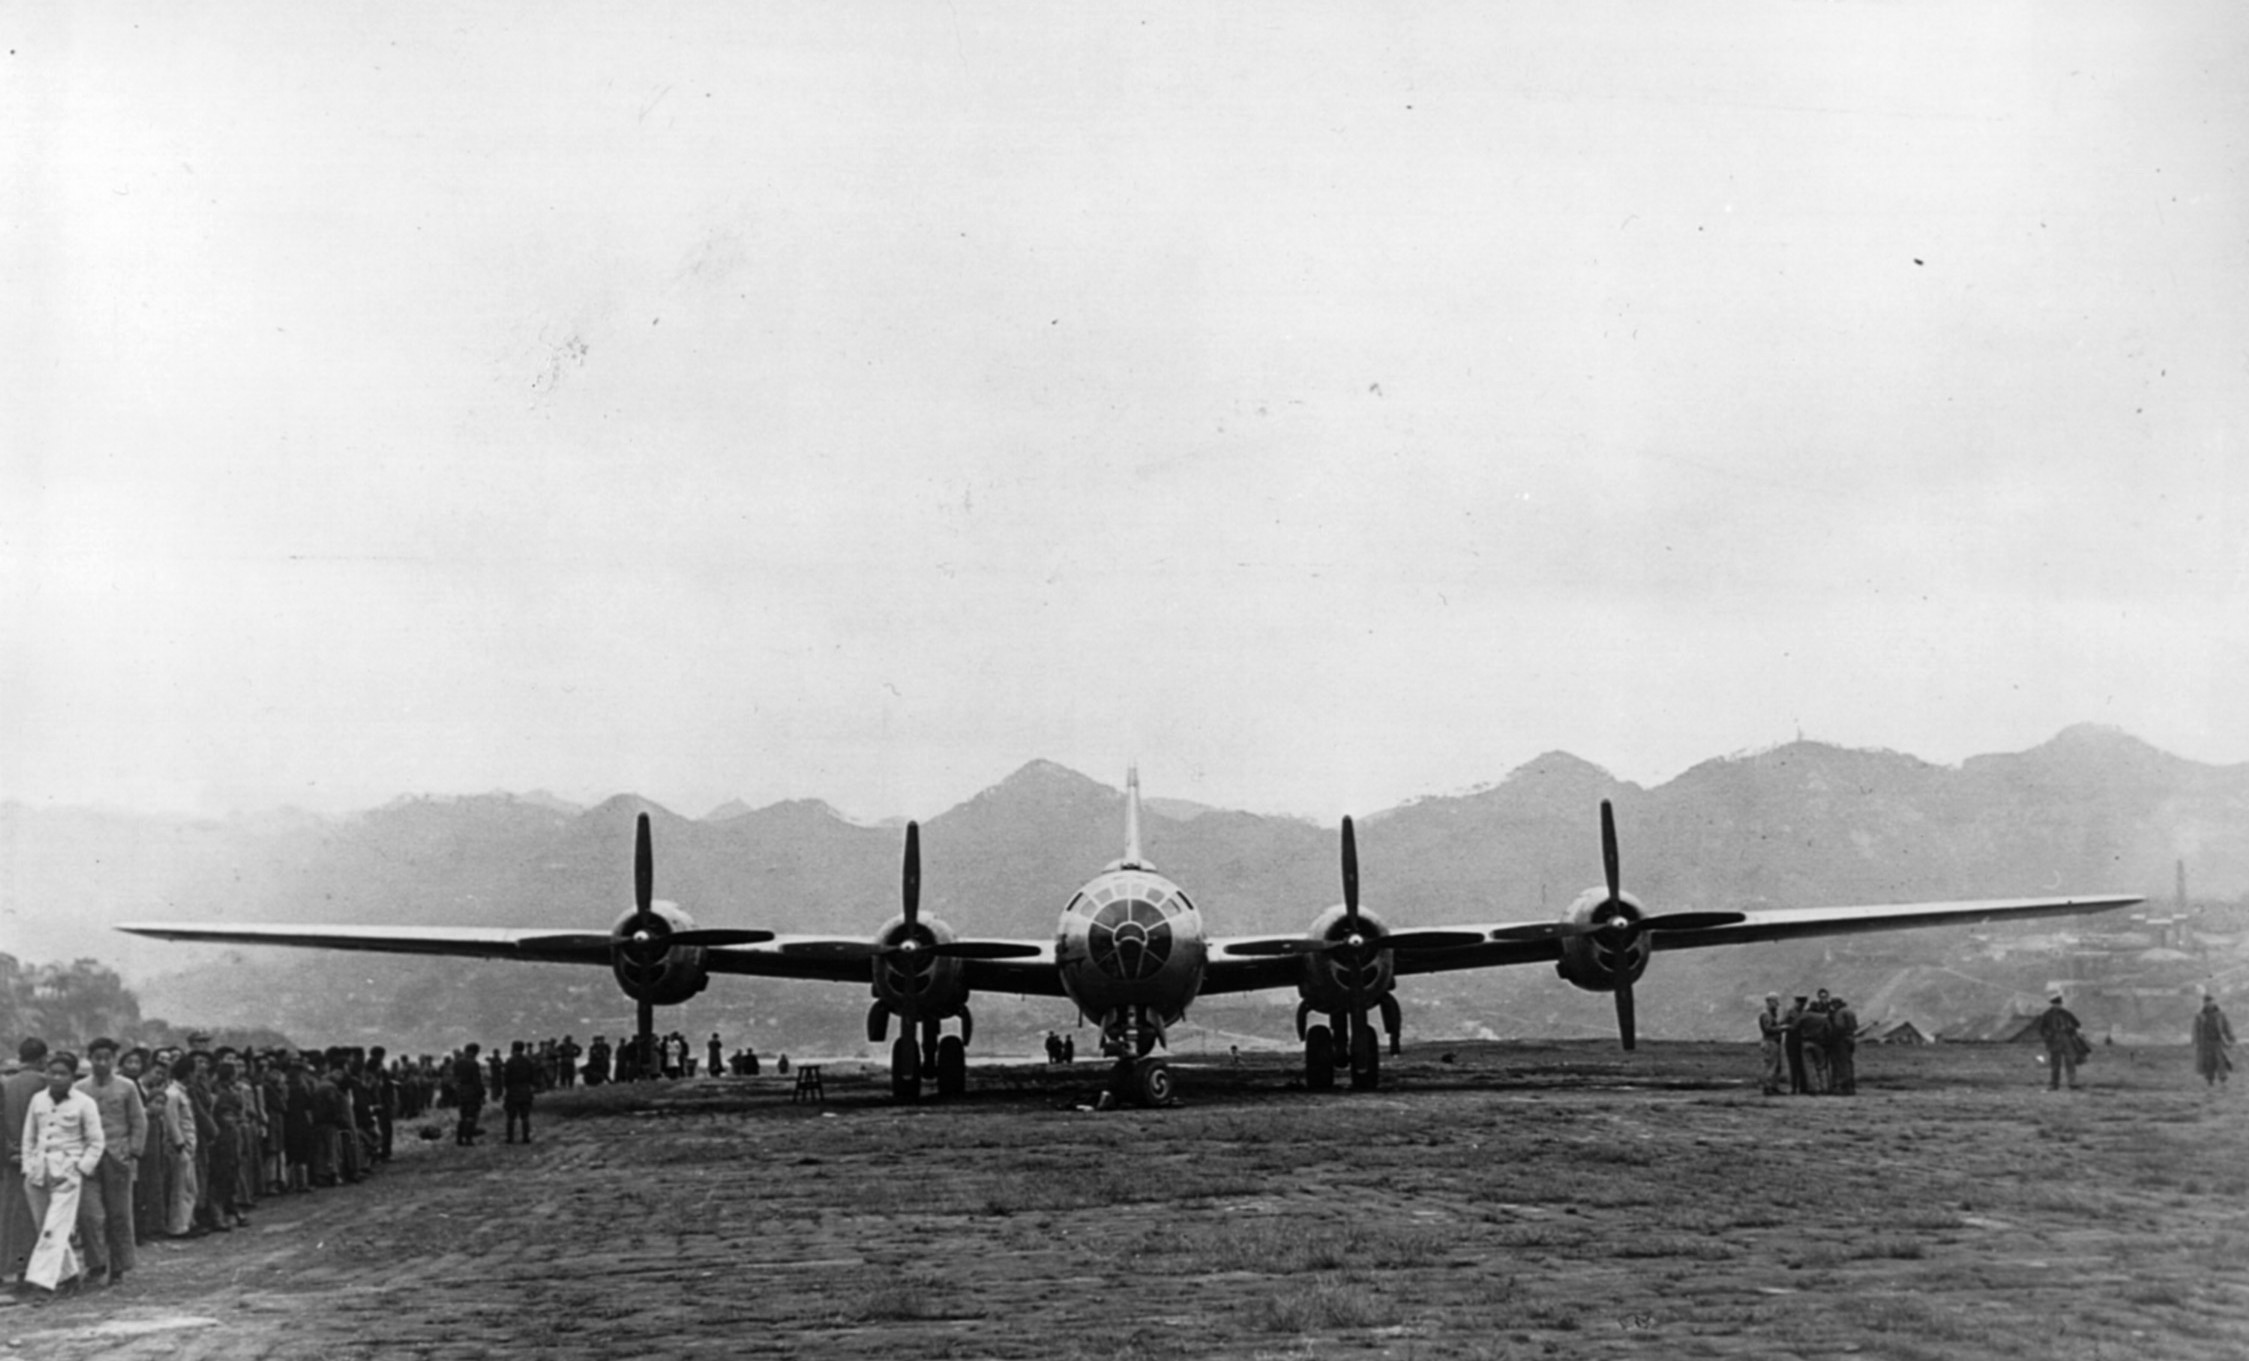 A B-29 stands at Chunking airport.